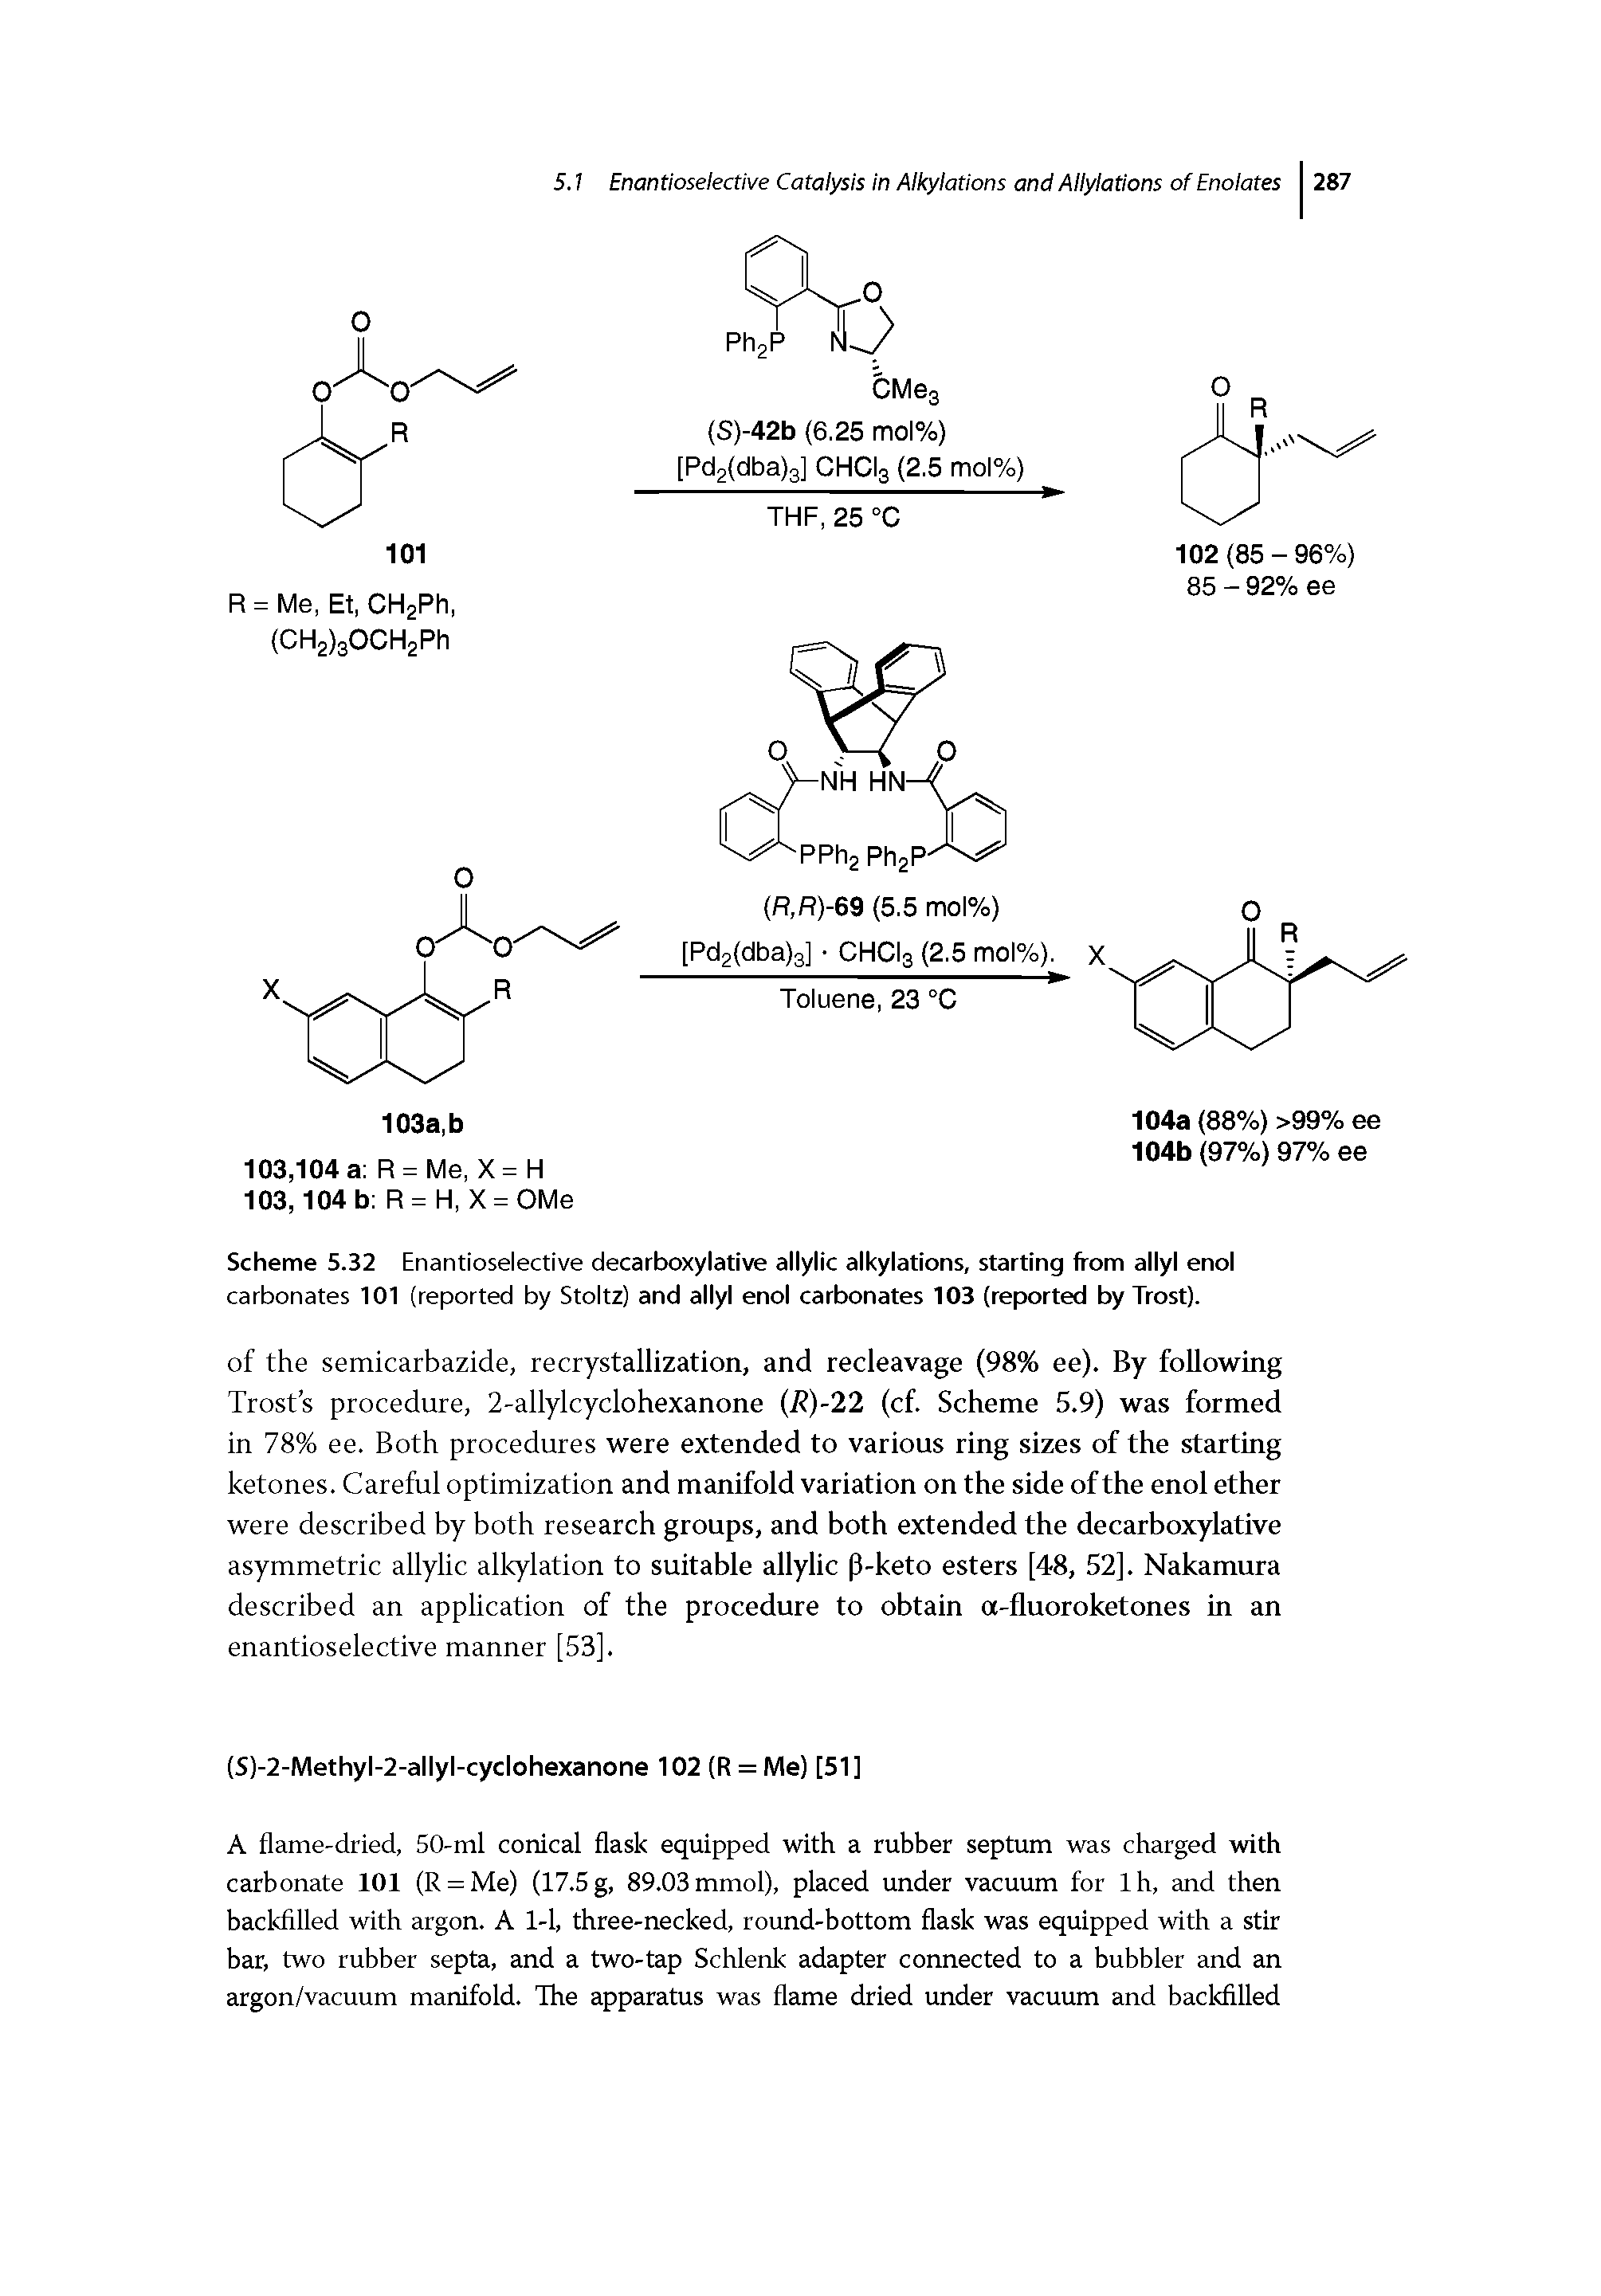 Scheme 5.32 Enantioselective decarboxylative allylic alkylations, starting from allyl enol carbonates 101 (reported by Stoltz) and allyl enol carbonates 103 (reported by Trost).